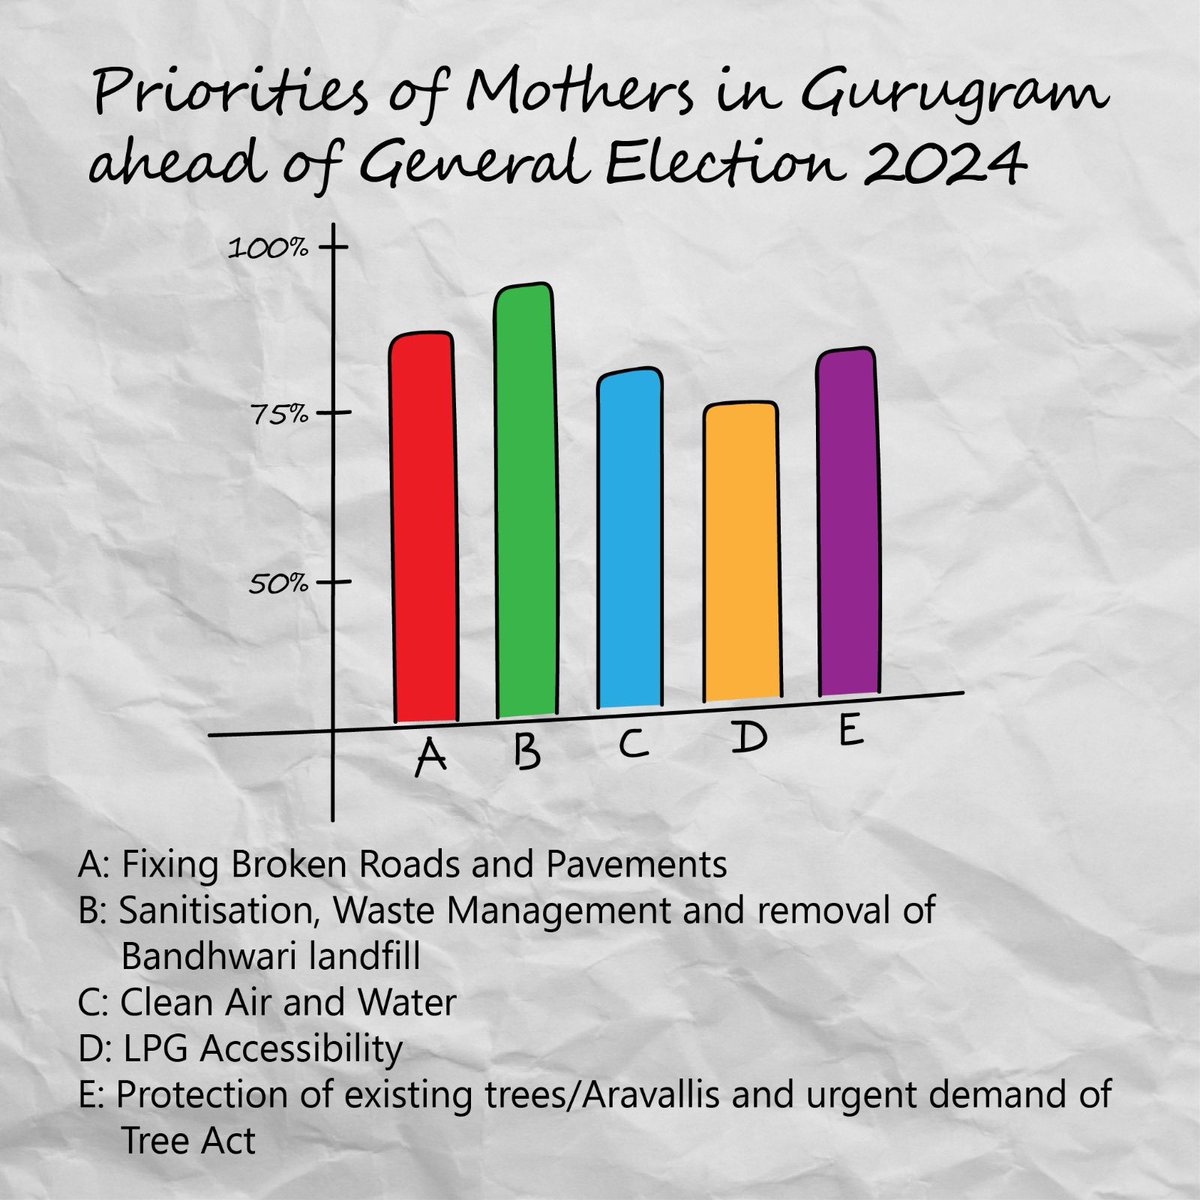 Our survey in 11 Indian cities ahead of the elections revealed key priorities for mothers ahead of the general elections;

#Gurugram clearly demands waste management as the priority!

@Rao_InderjitS @CaptAjayYadav are you with #SwachhHawaChunav #CleanAirElections?